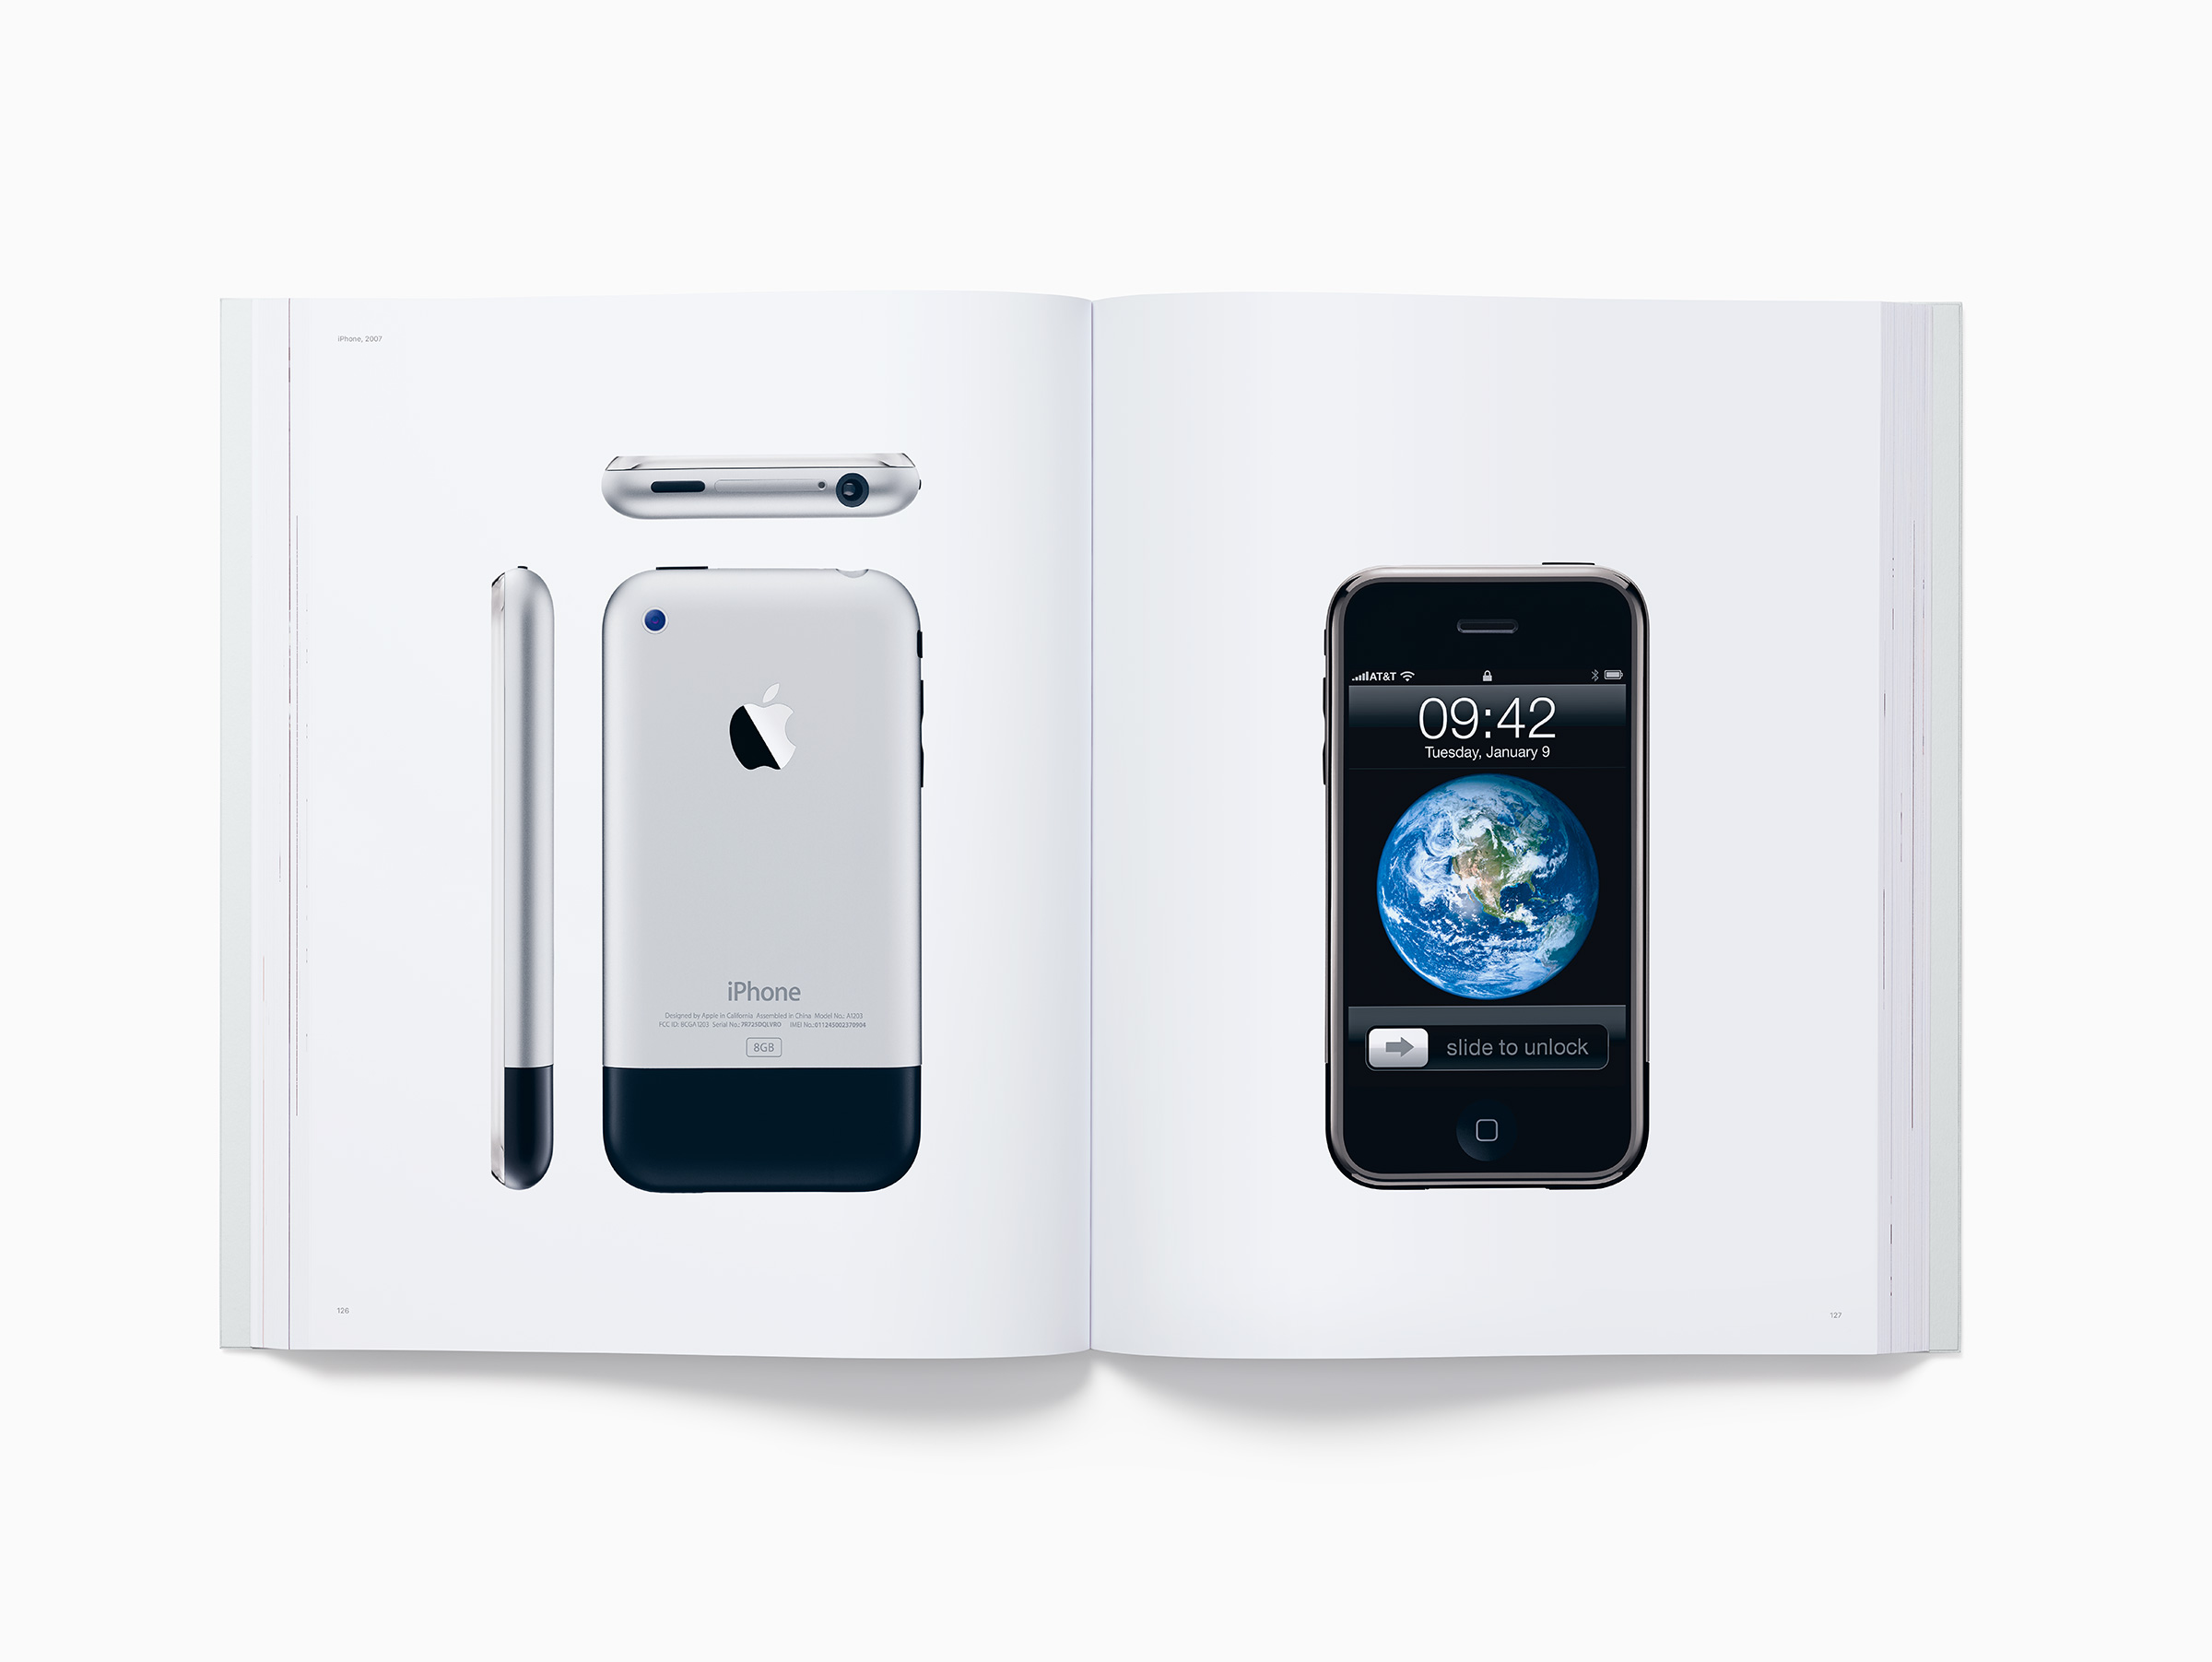 Apple wants to sell you a $300 photo book about its products